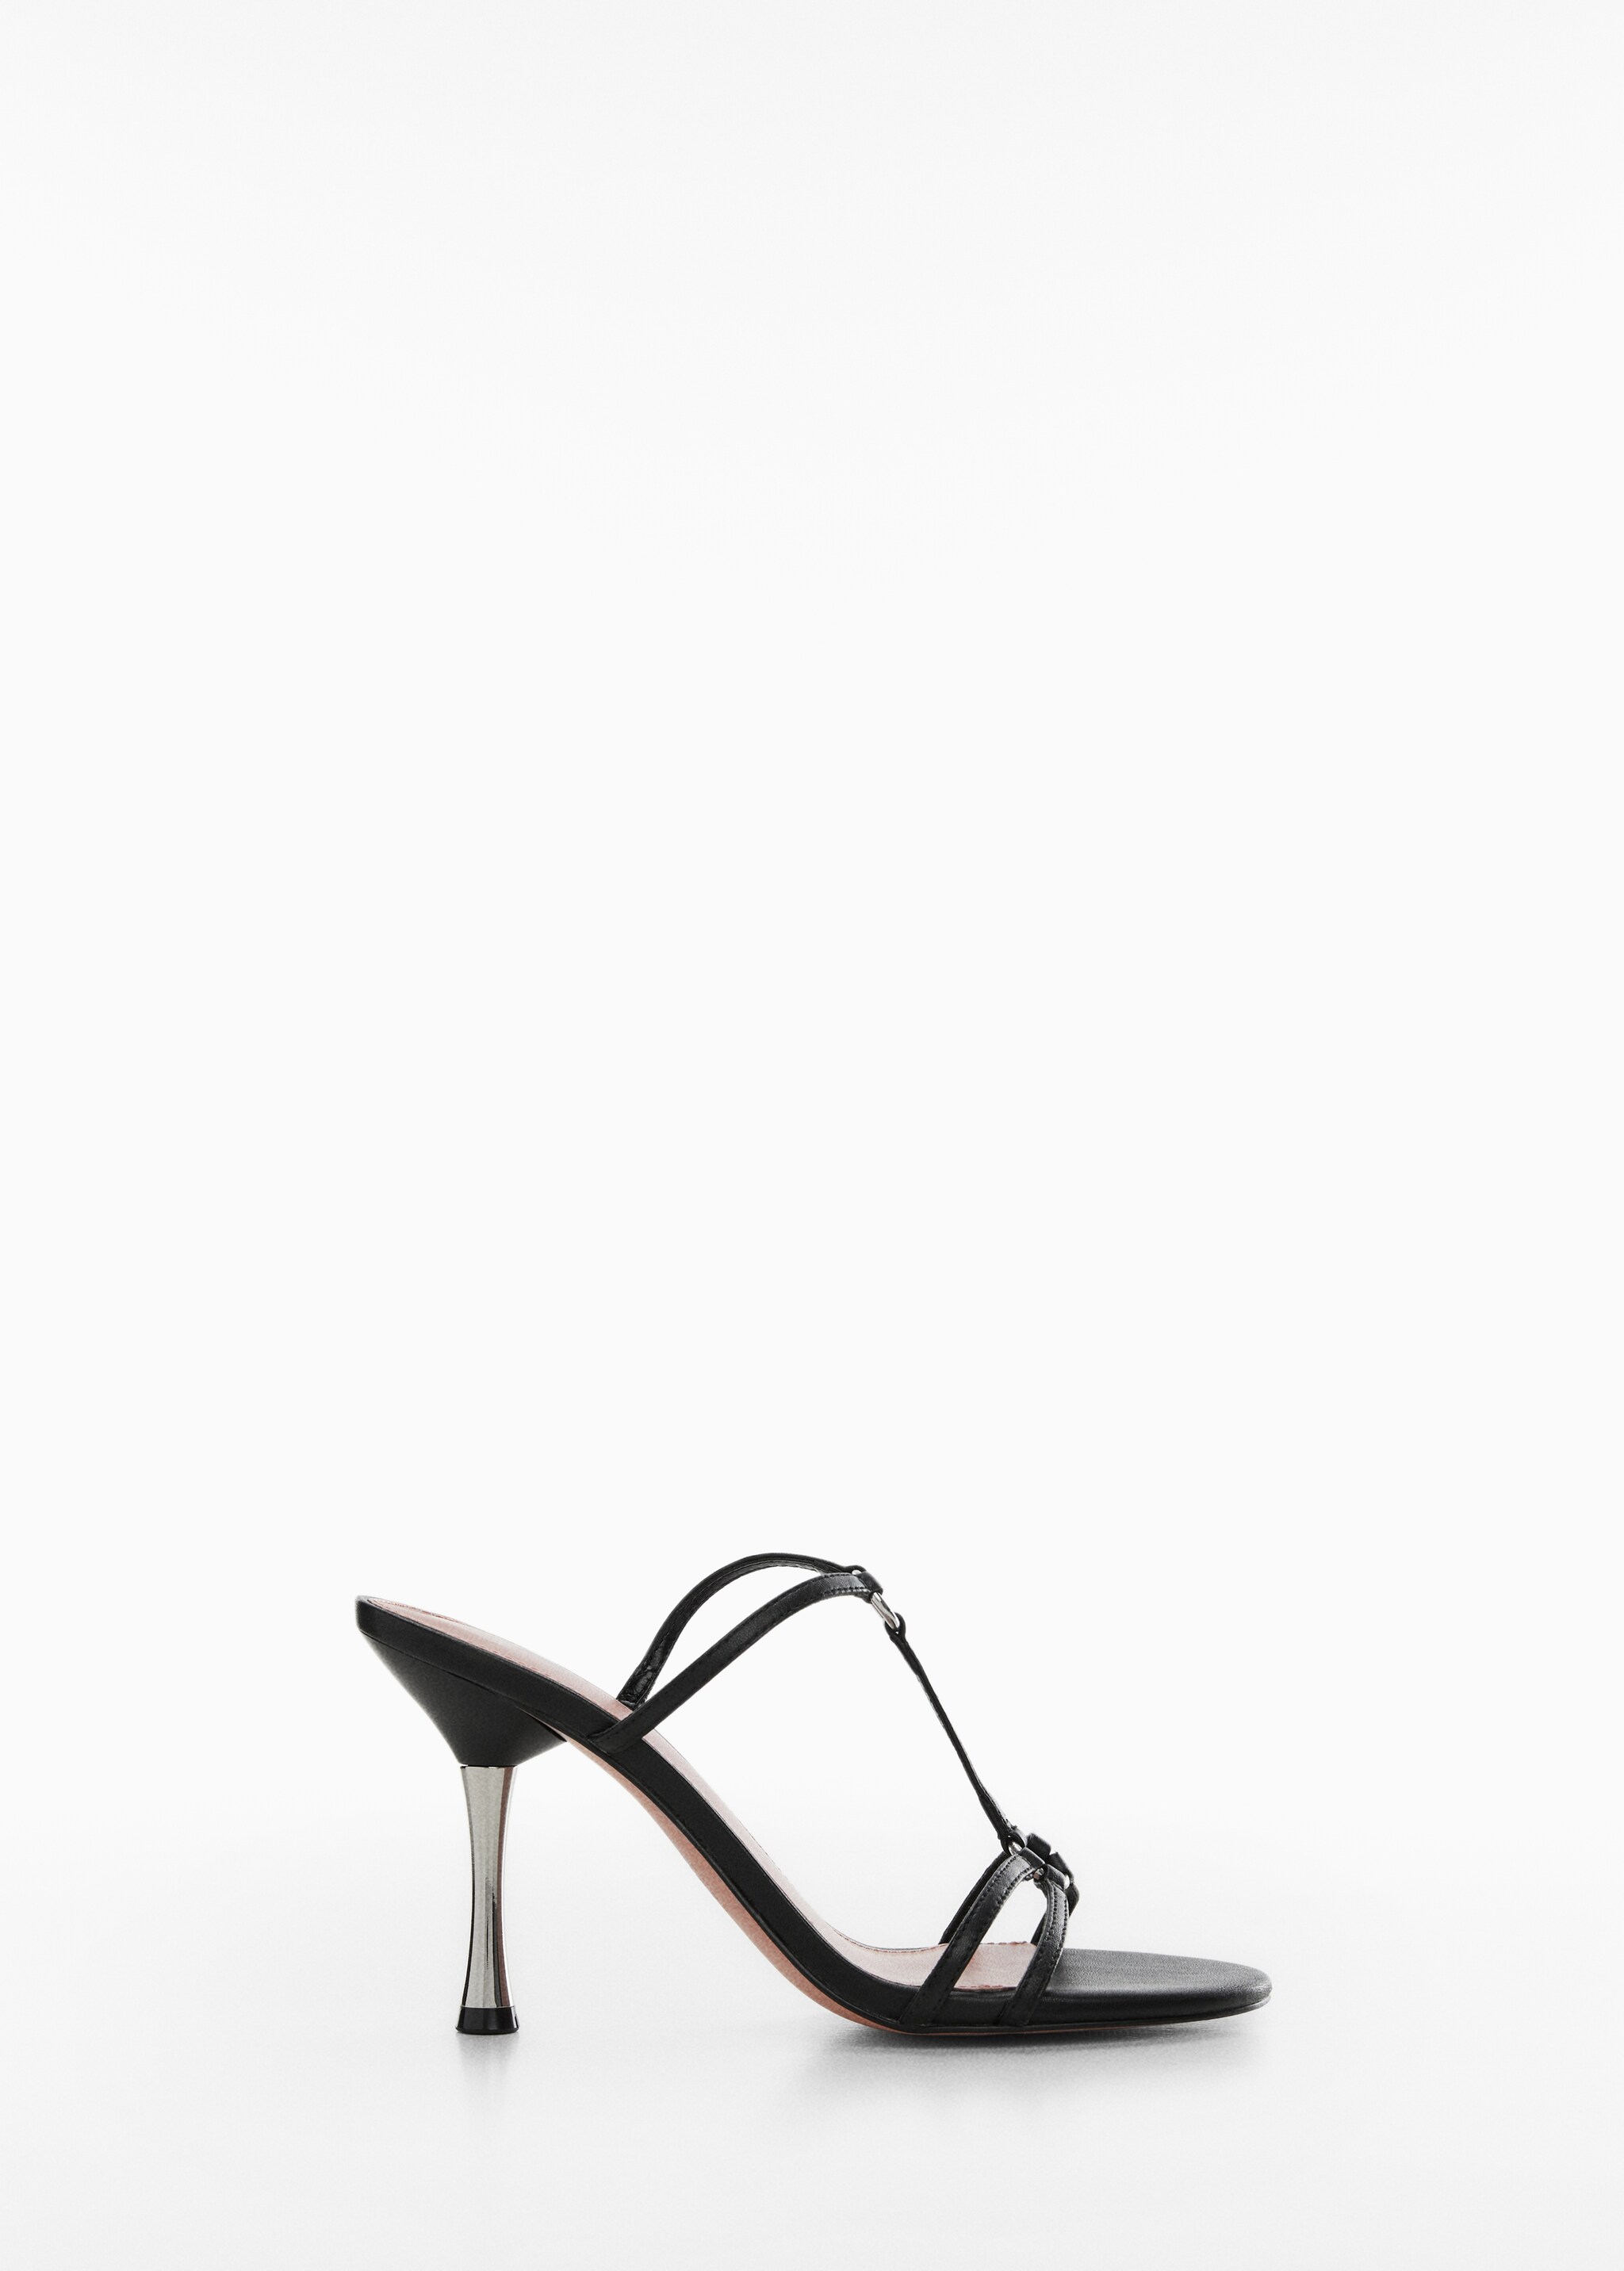 Heeled leather sandals with straps - Article without model